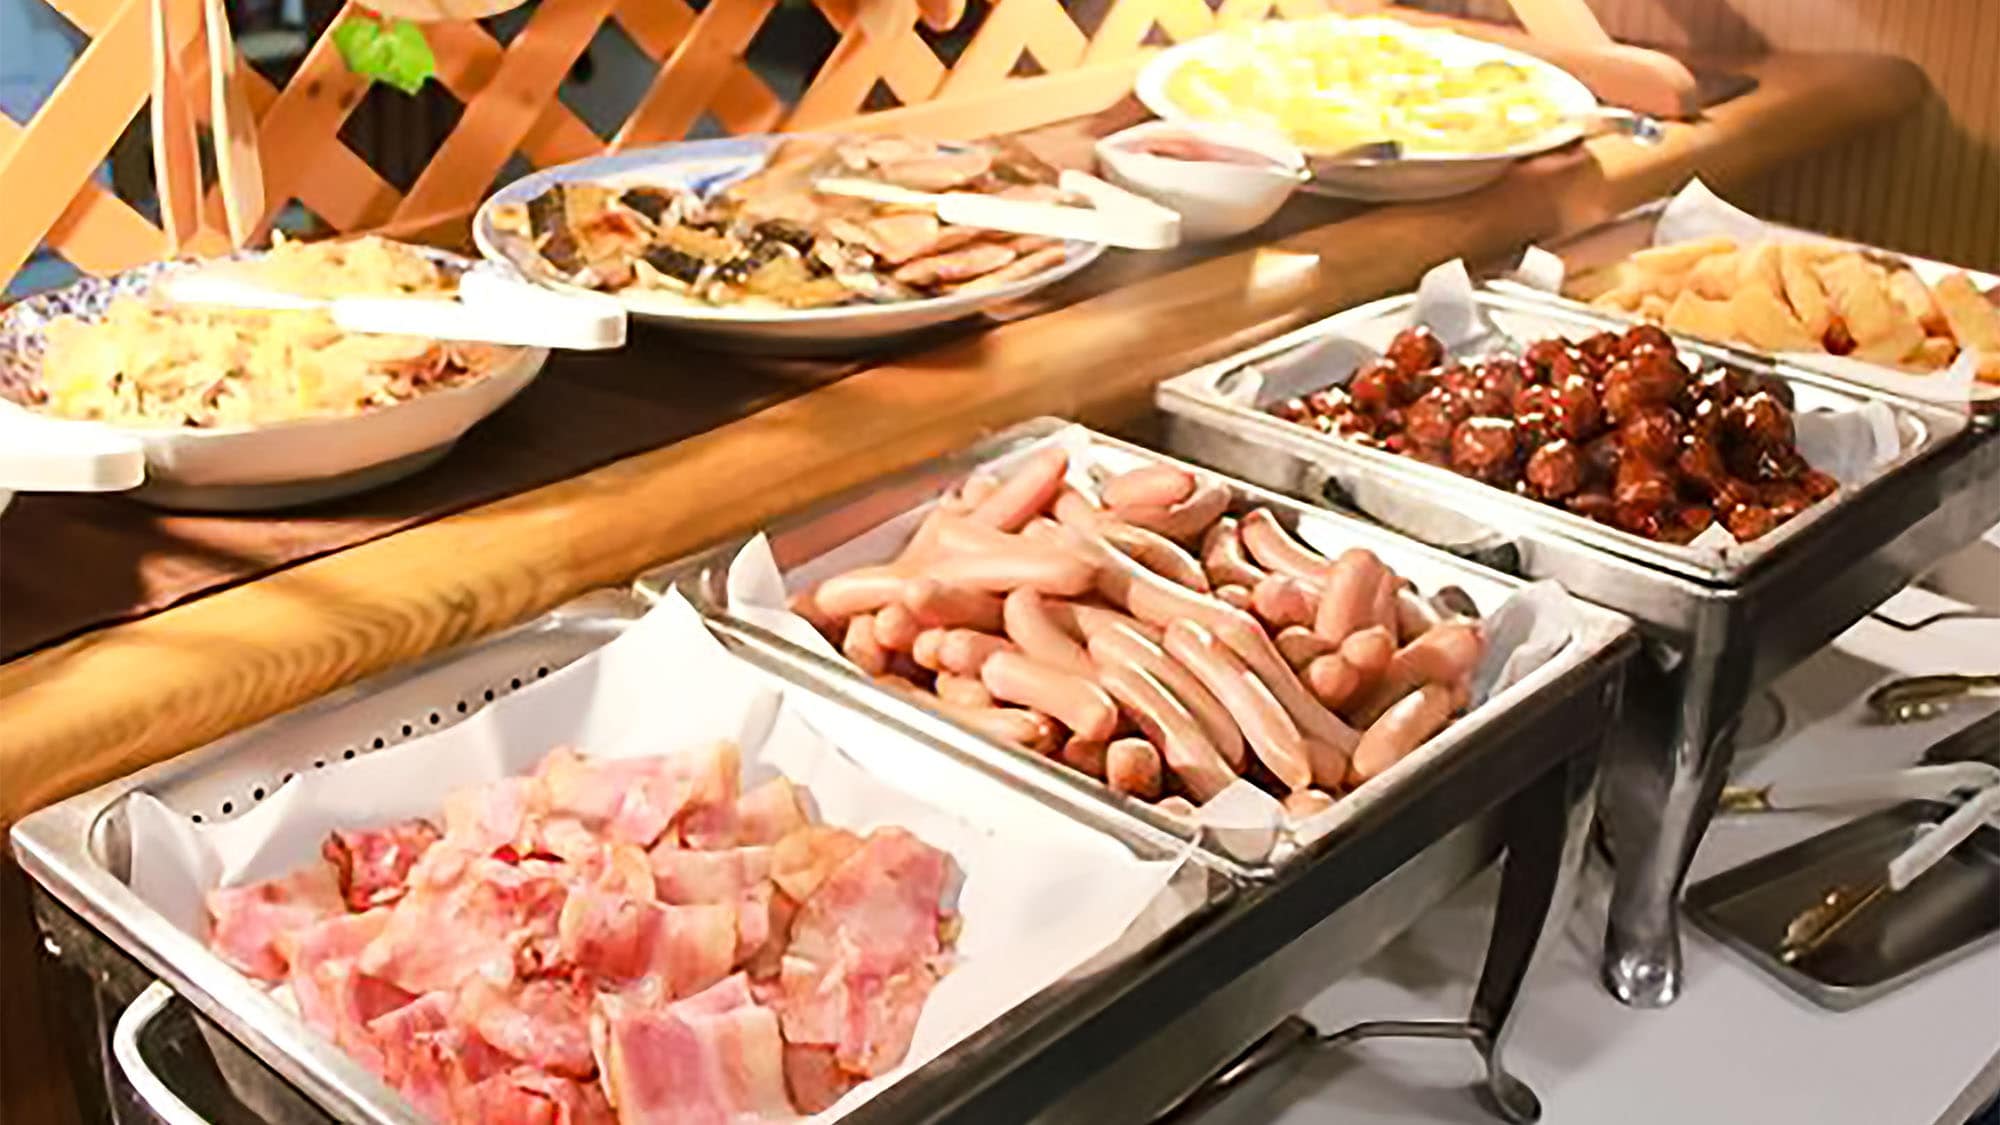 ・ Breakfast buffet popular with a rich menu using local ingredients